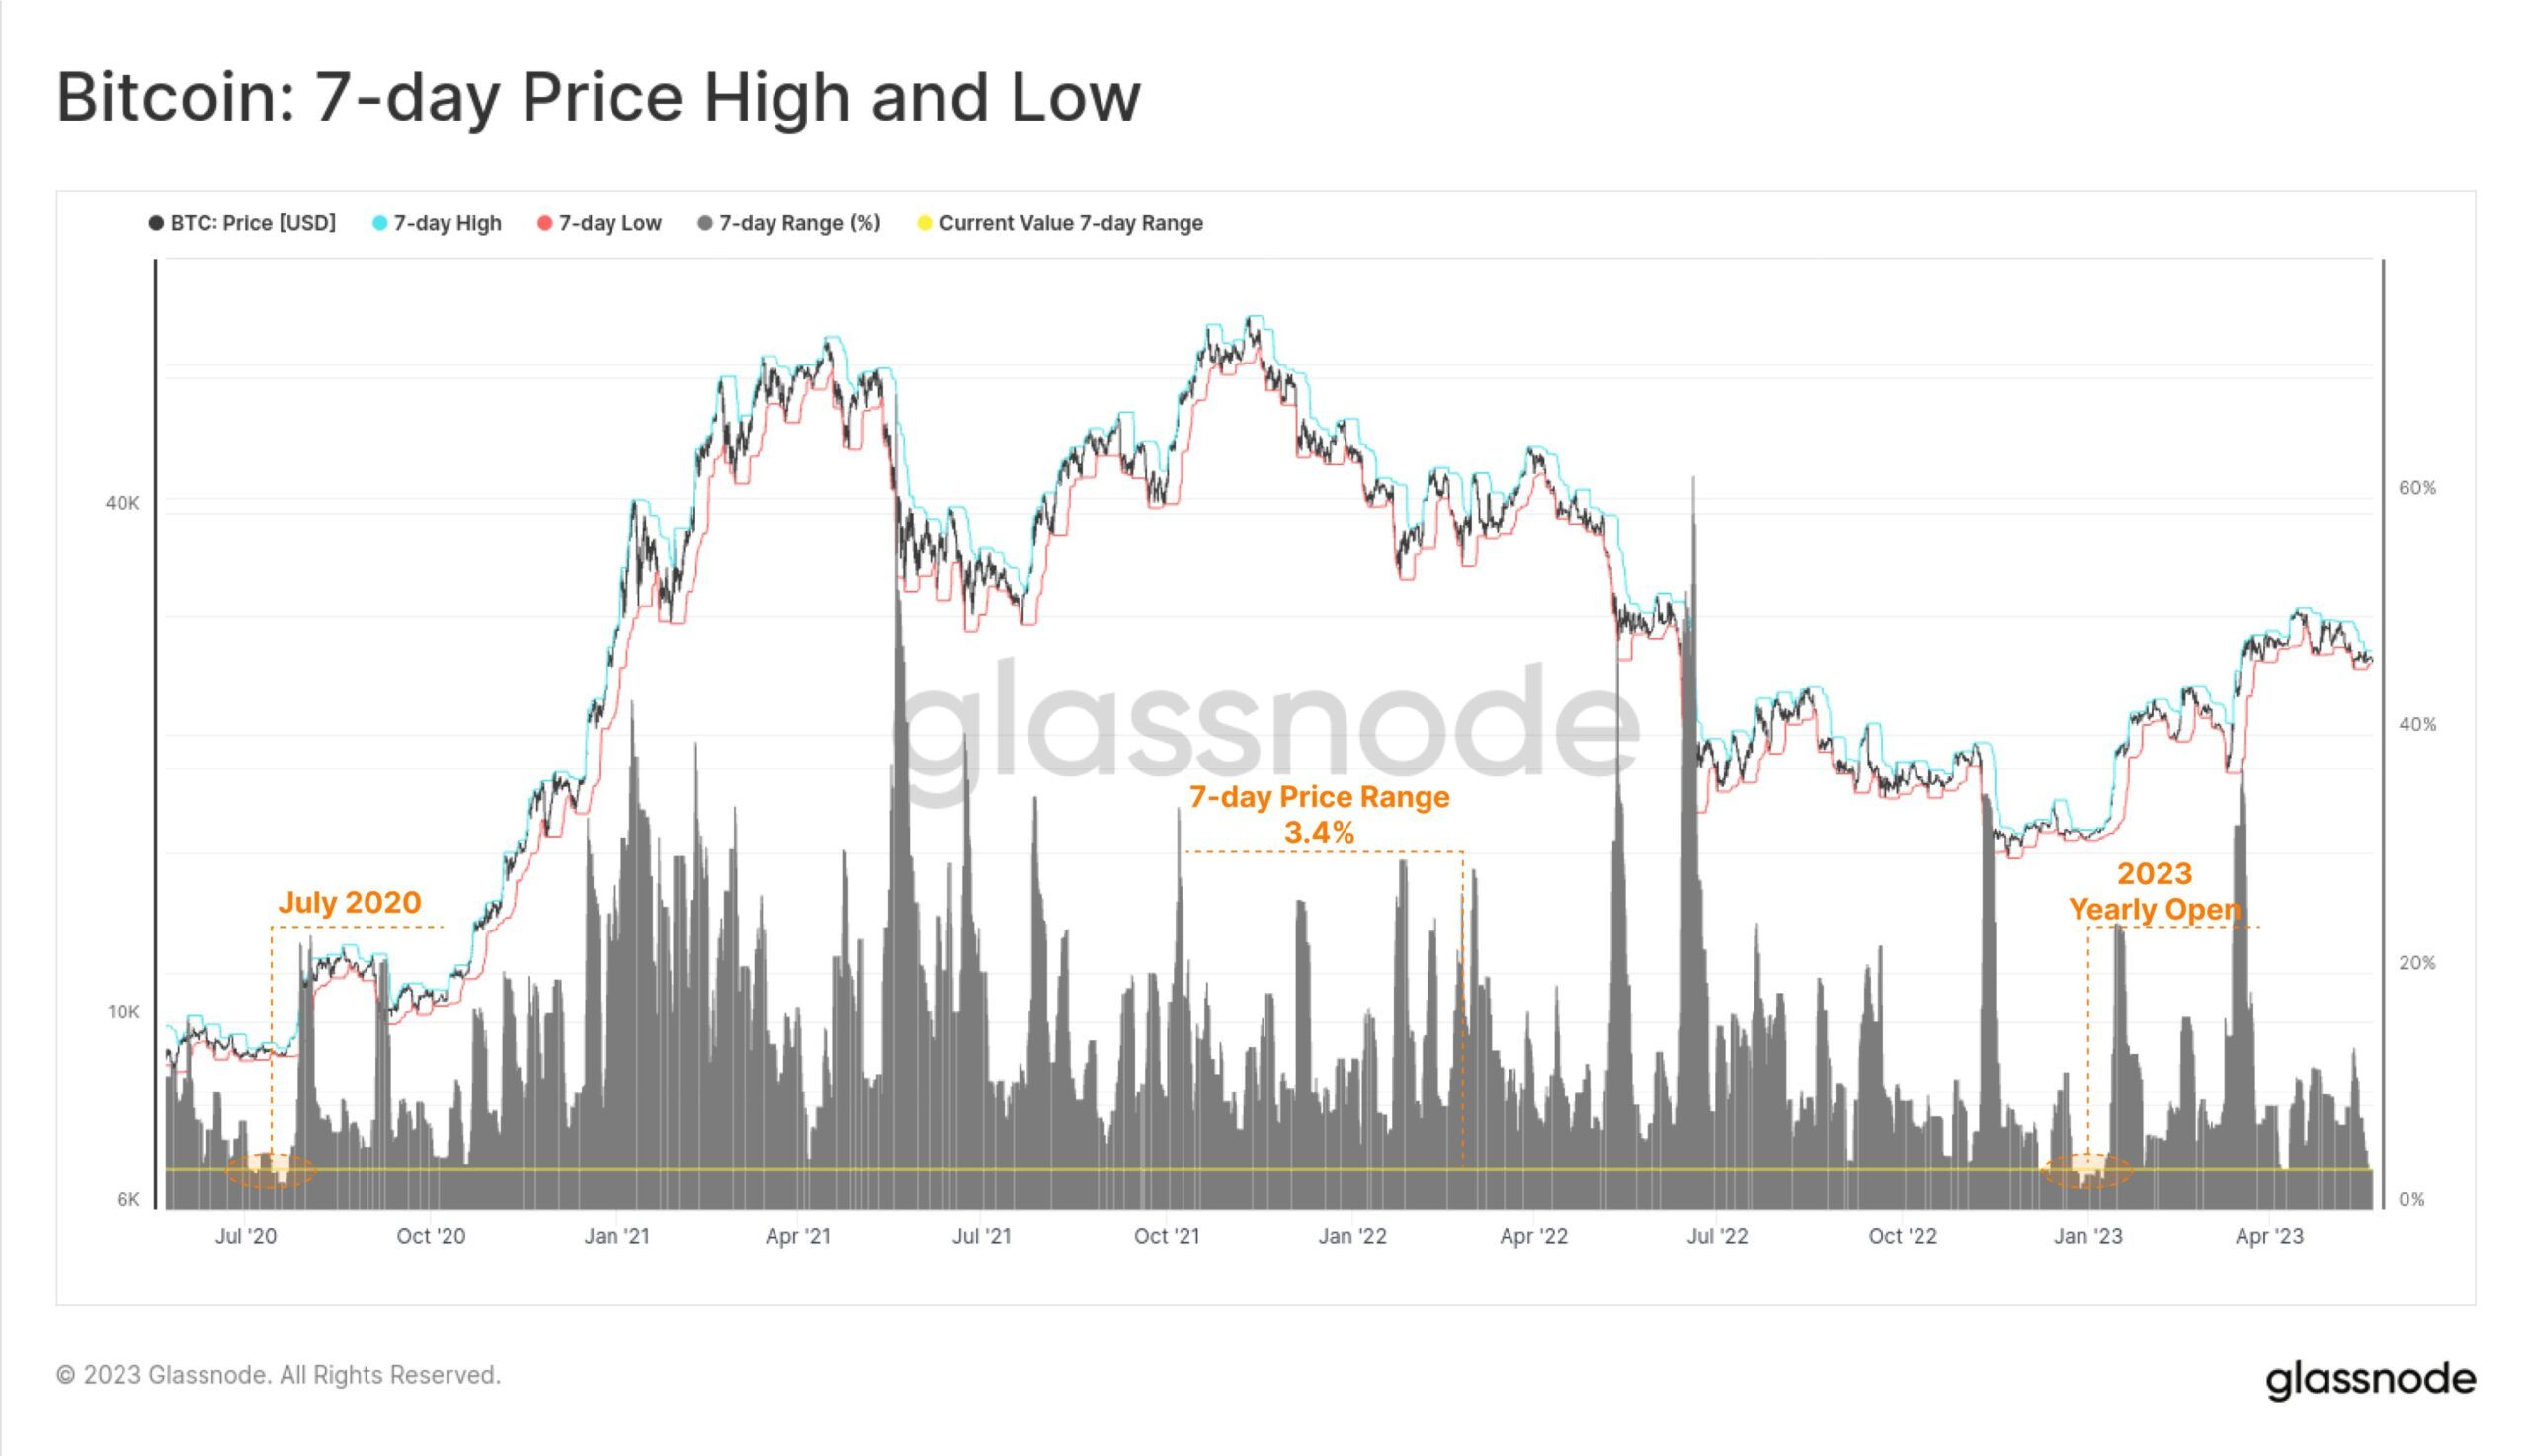 Bitcoin Volatility 7-Day Price Highs and Lows | Glassnode